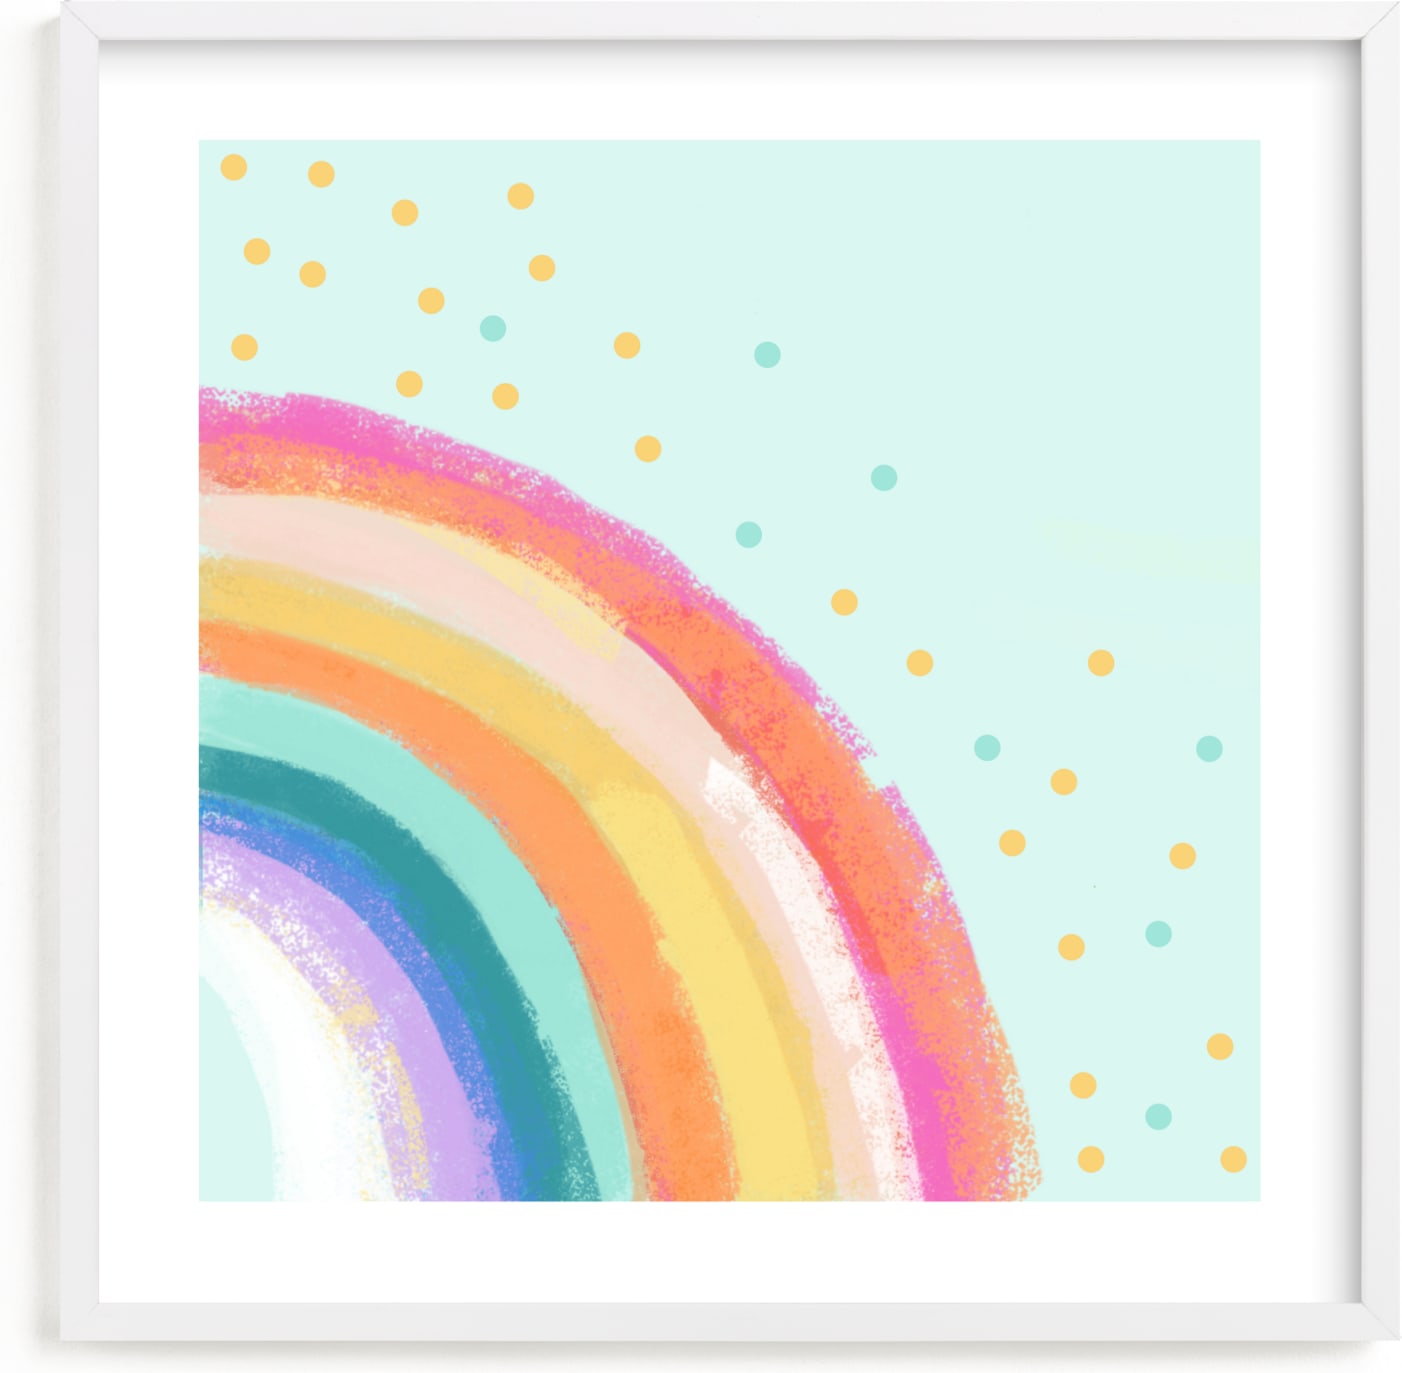 This is a colorful kids wall art by AlisonJerry called Ventura Rainbow l.